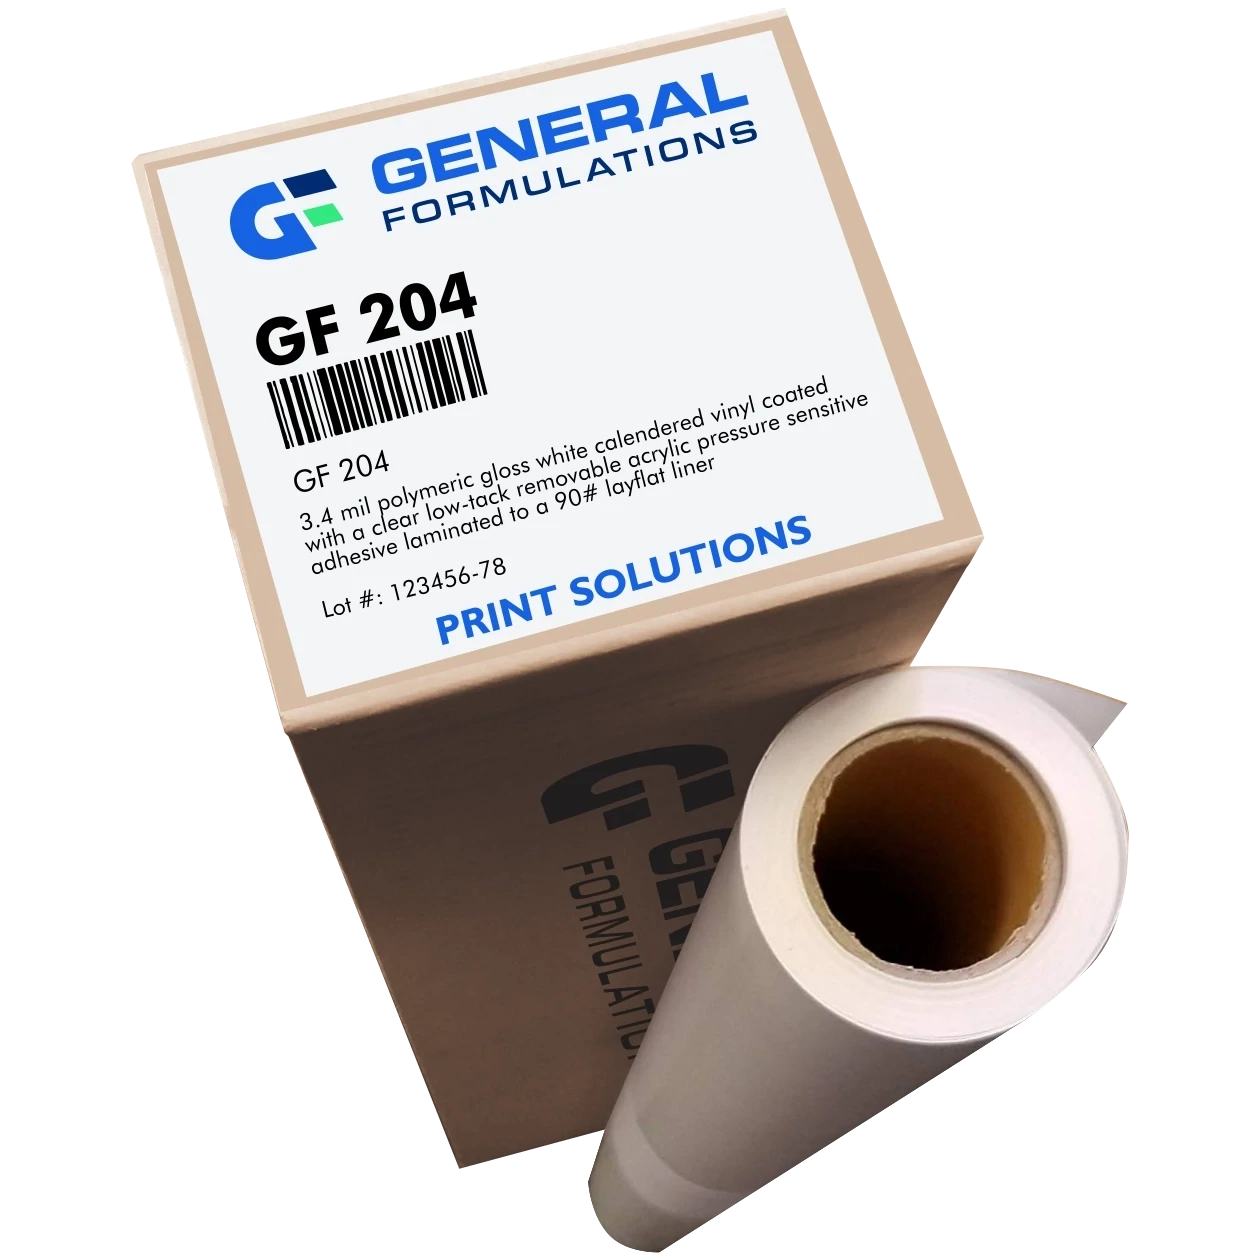 General Formulations 204 Gloss White Vinyl - Low-Tack Removable